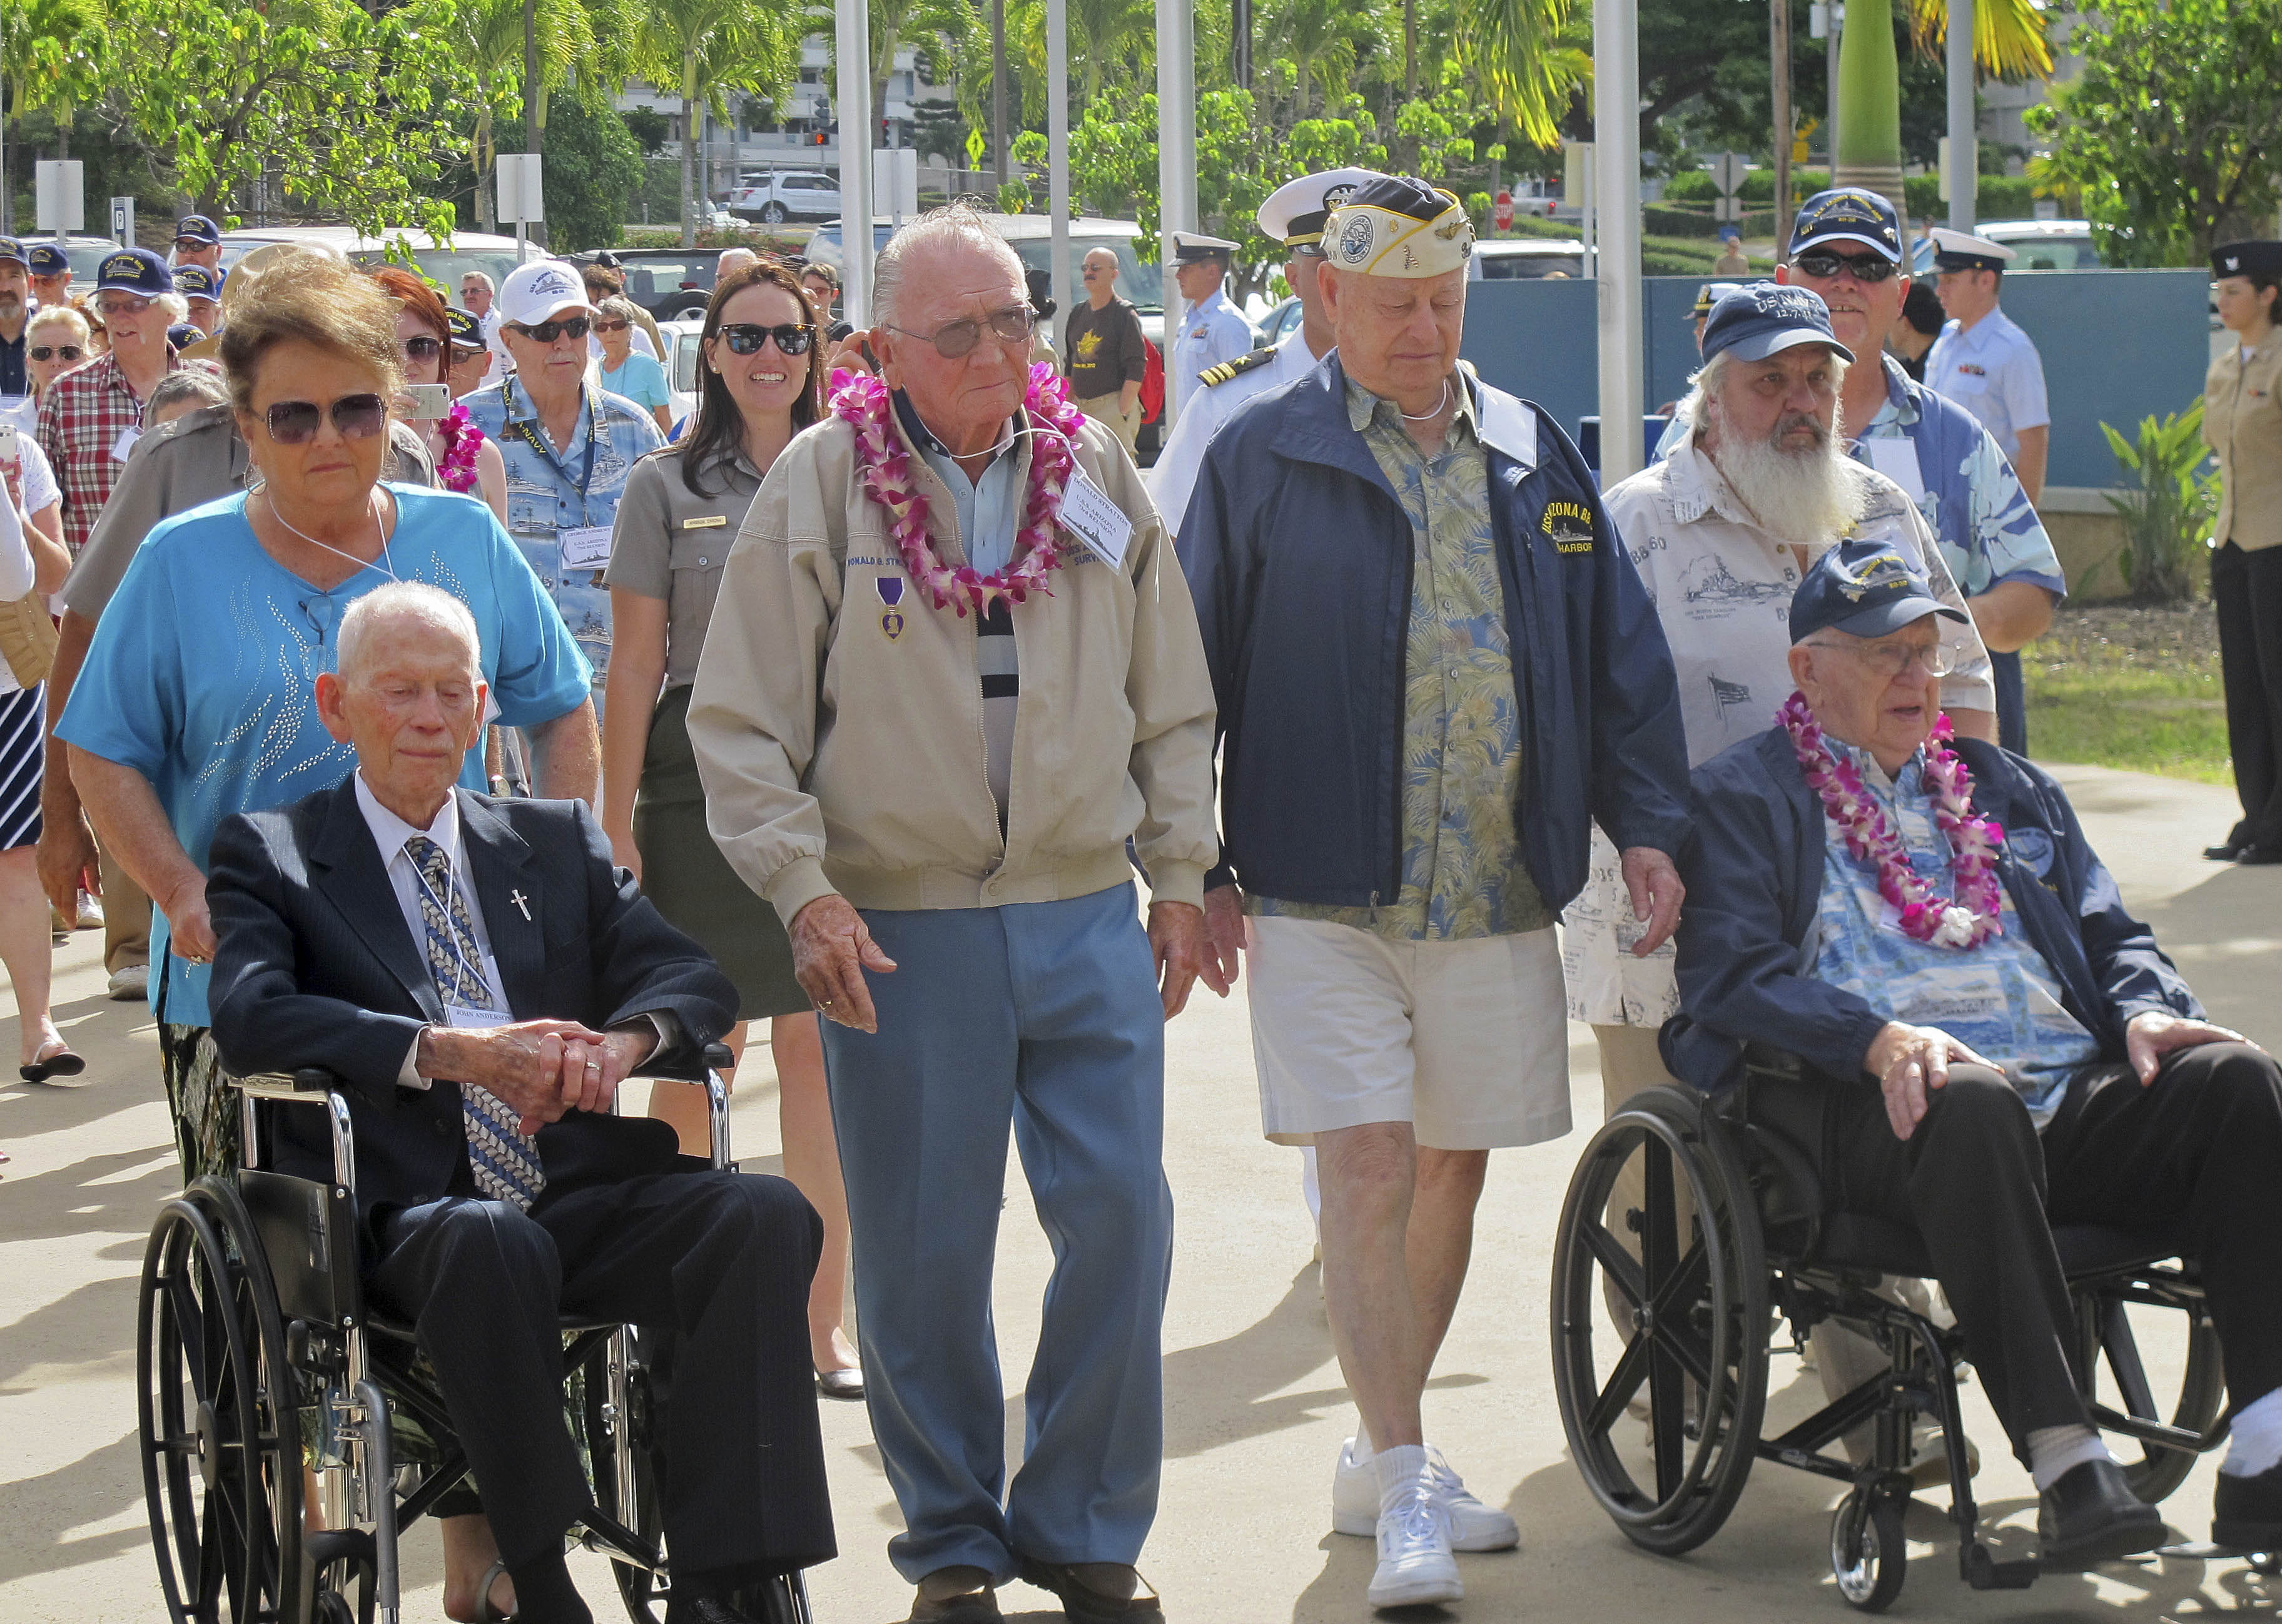 USS Arizona survivors from left, John Anderson, Don Stratton, Louis Conter and Lauren Bruner arrive Tuesday, Dec. 2, 2014, in Pearl Harbor, Hawaii. (AP Photo/Audrey McAvoy)